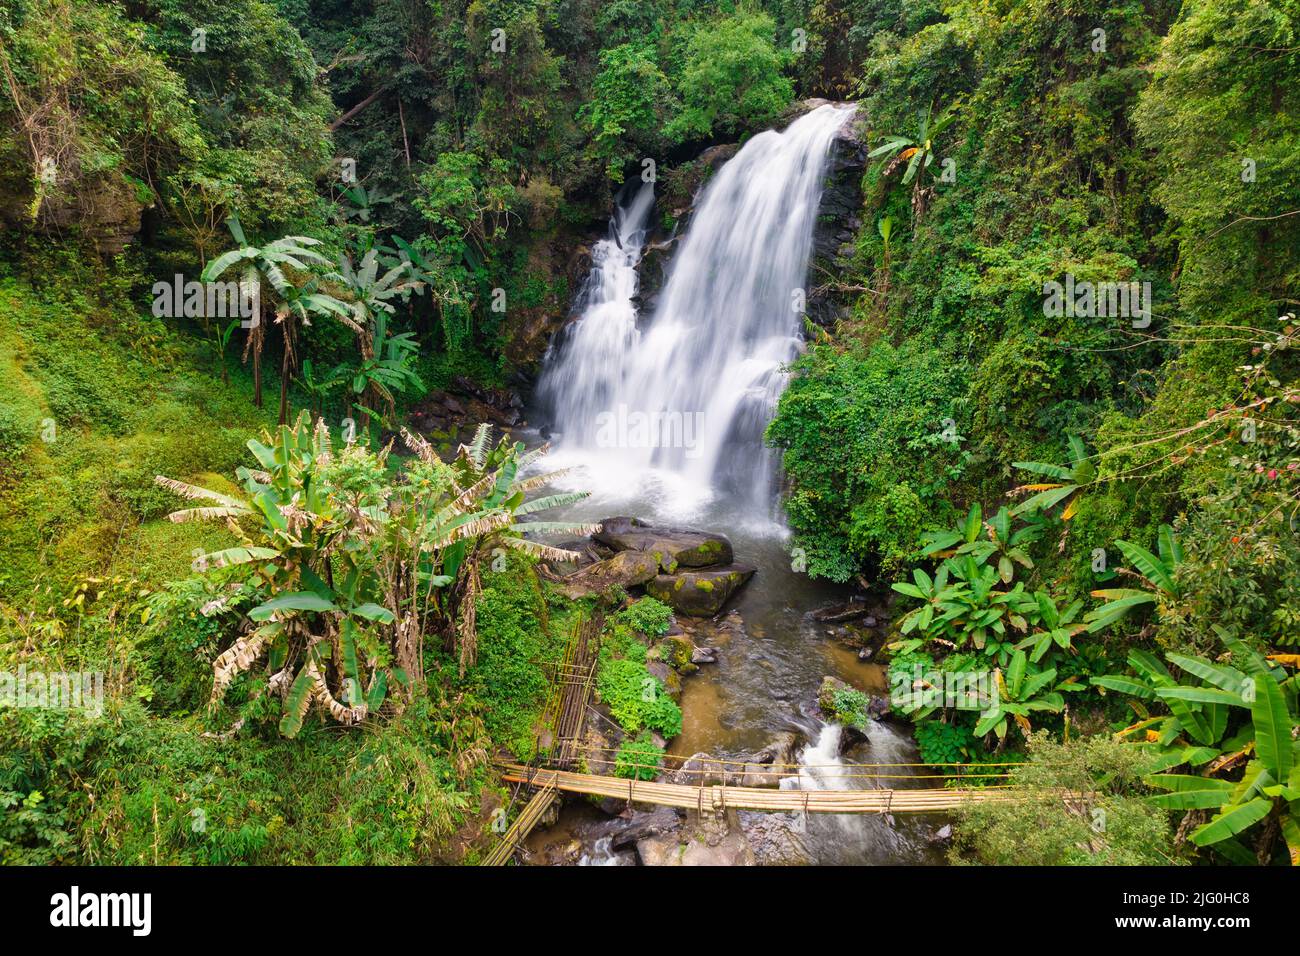 Aerial shot of a large waterfall in the tropical forest of Doi Inthanon, Thailand Stock Photo